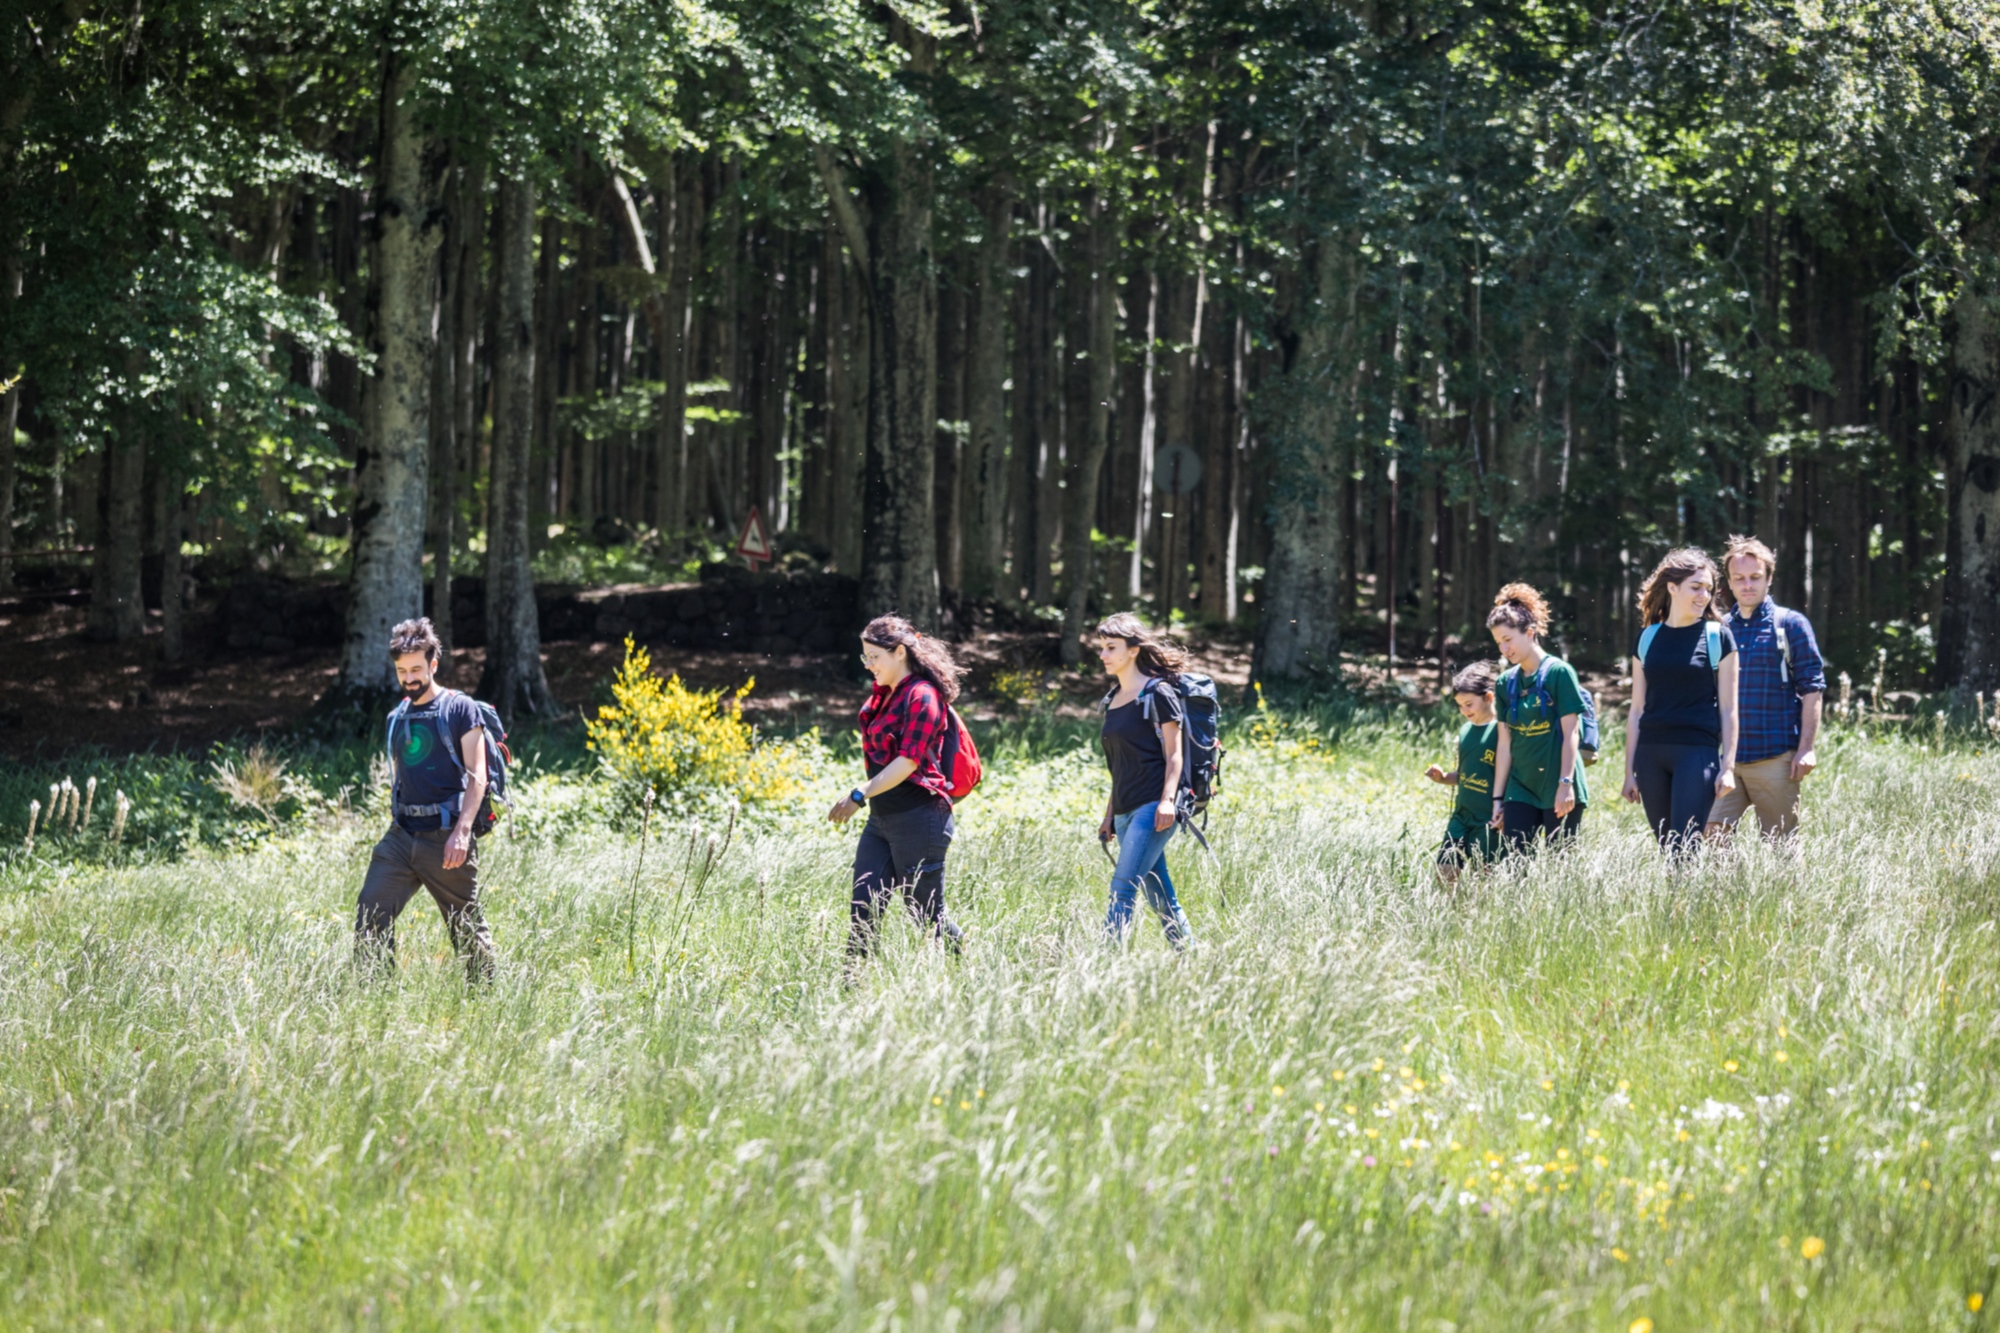 Trekking in the beech forest of Monte Amiata